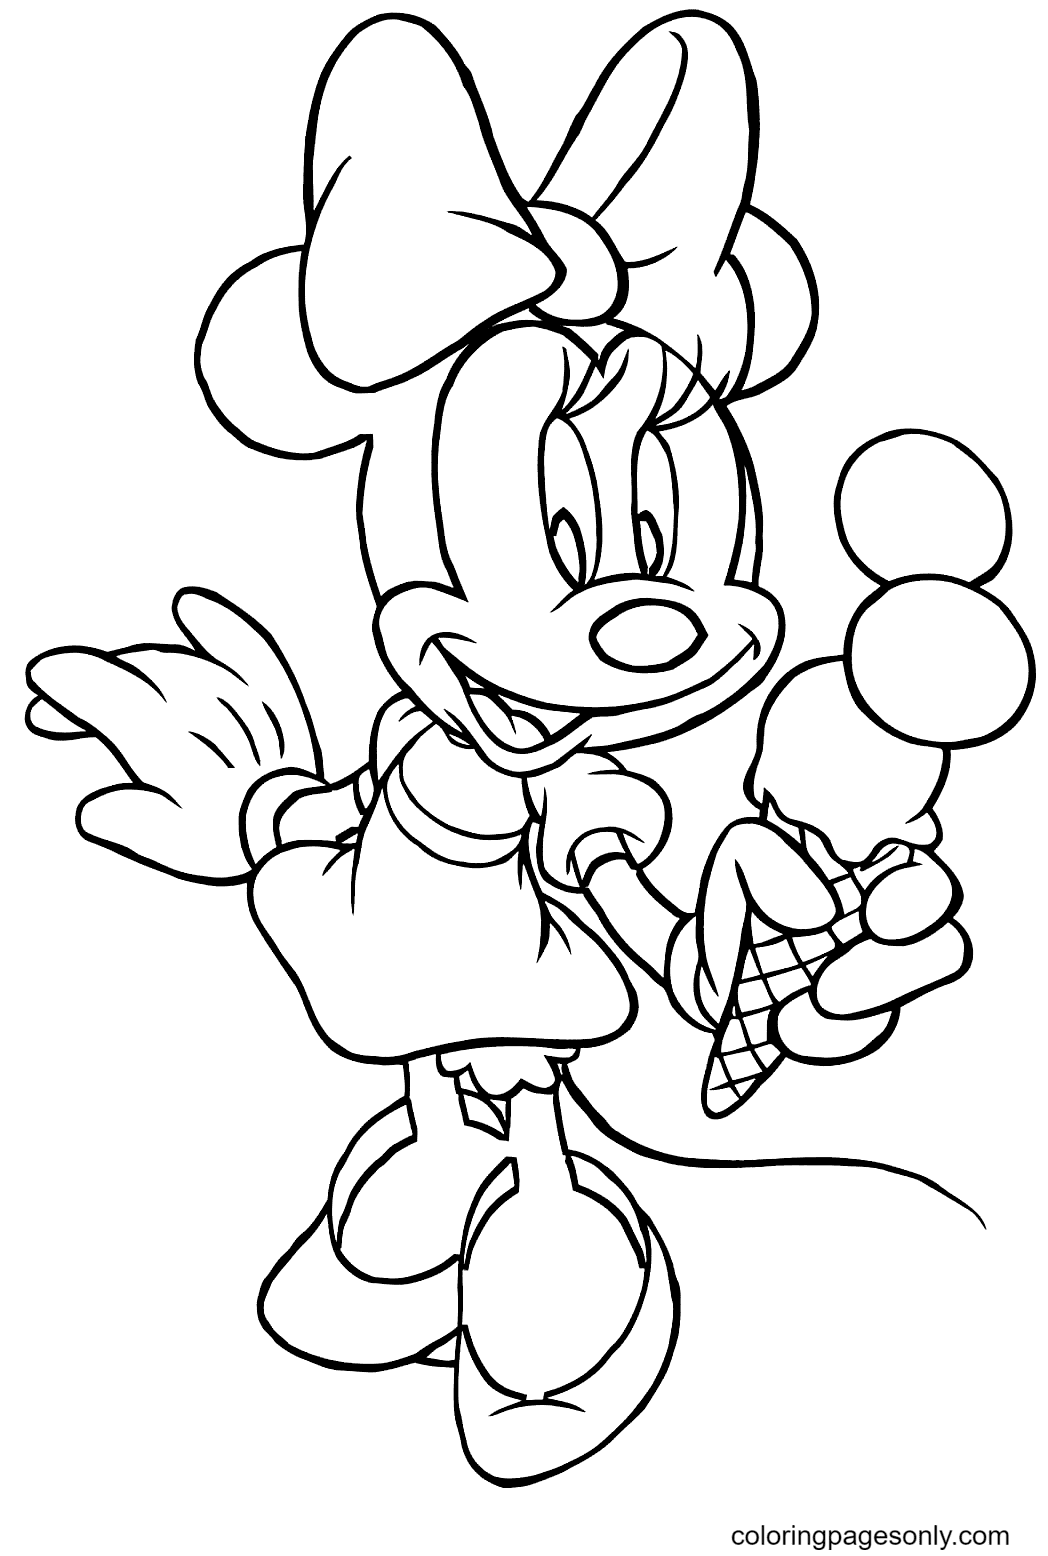 Minnie Mouse having Ice Cream Coloring Page